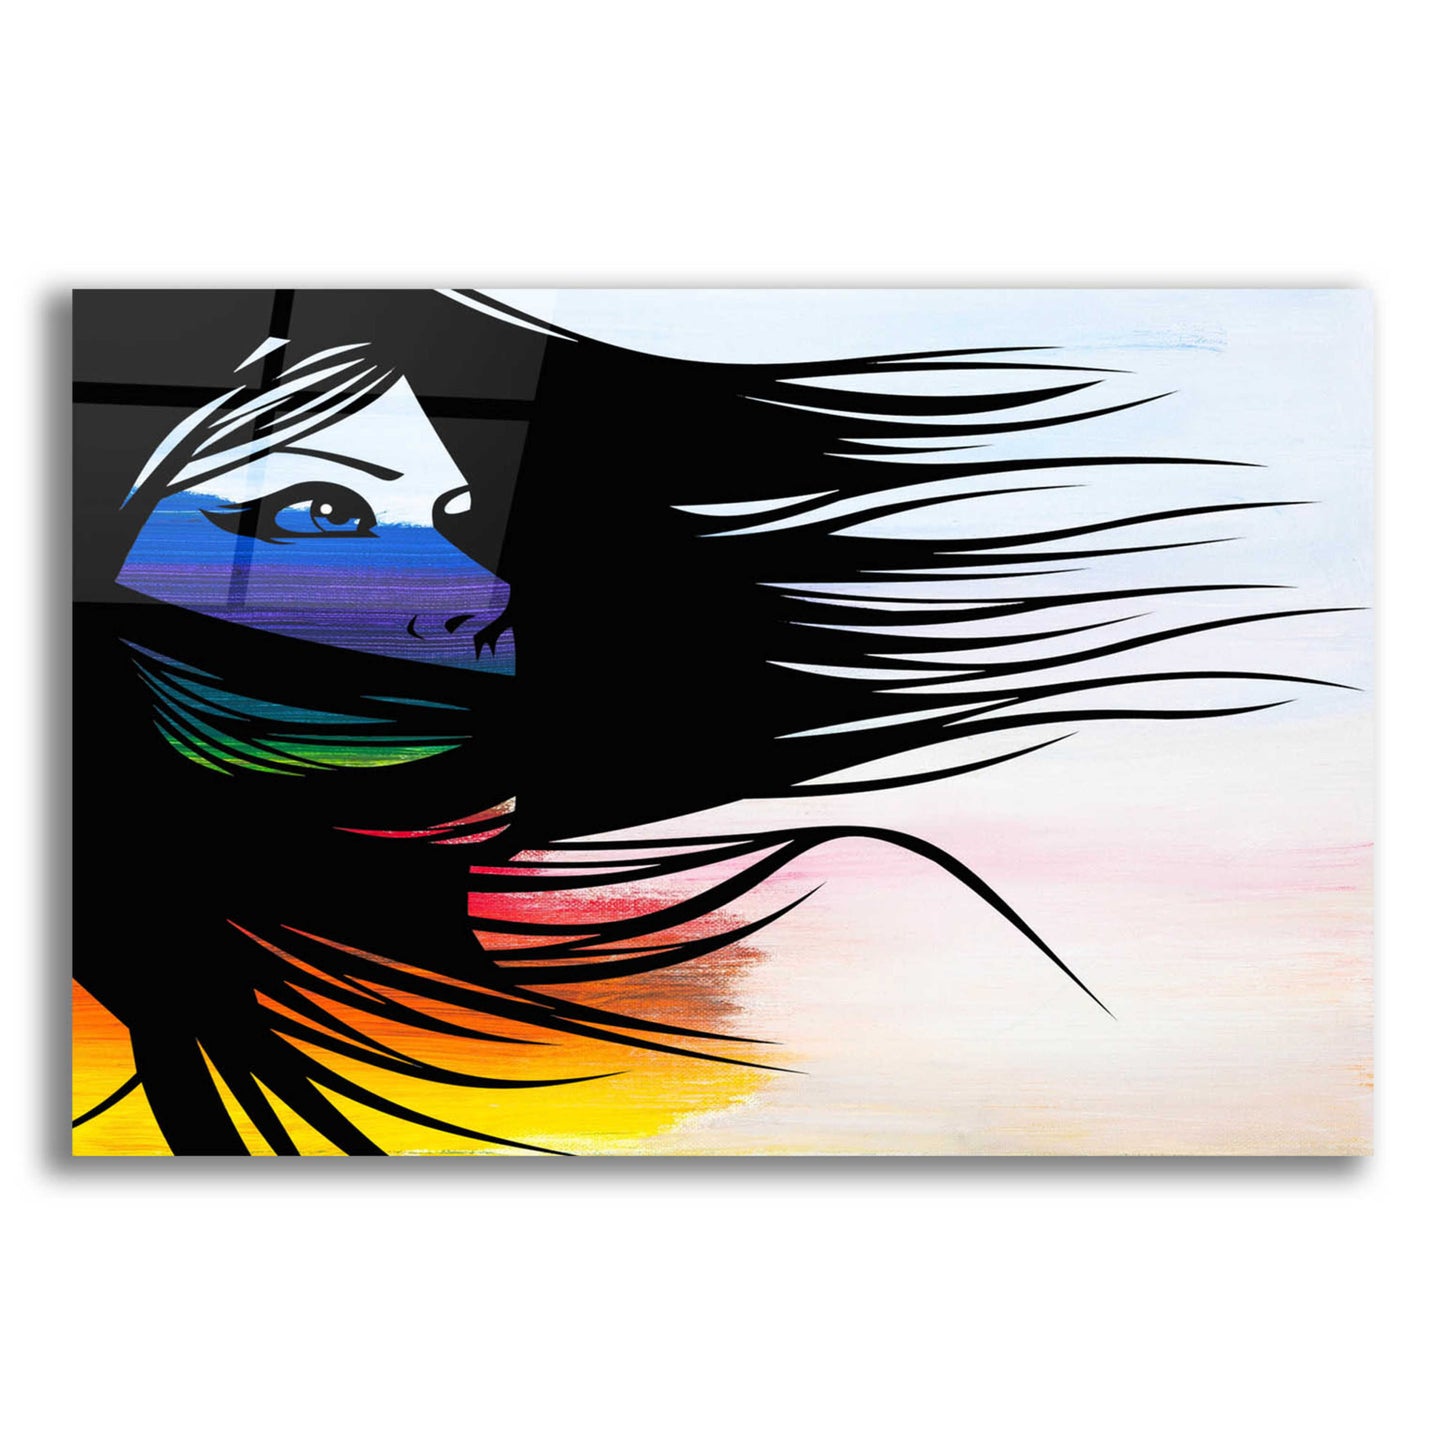 Epic Art 'Infusion' by Karen Smith Acrylic Glass Wall Art